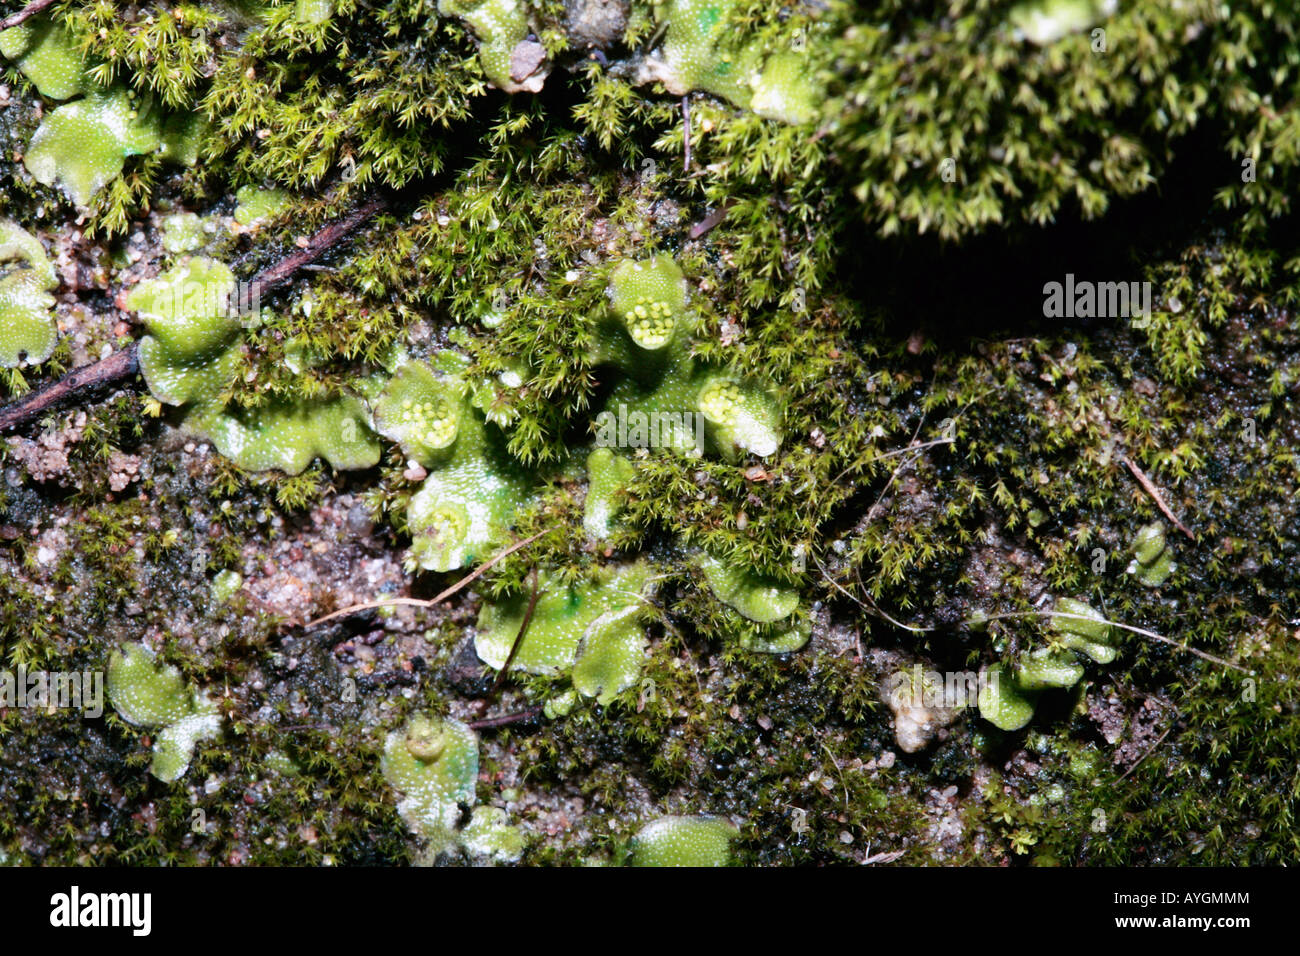 Thallose Liverwort showing crescent-shaped gemmae cups with gemmae inside, growing with Moss-Lunularia cruciata- Bryophyta Stock Photo